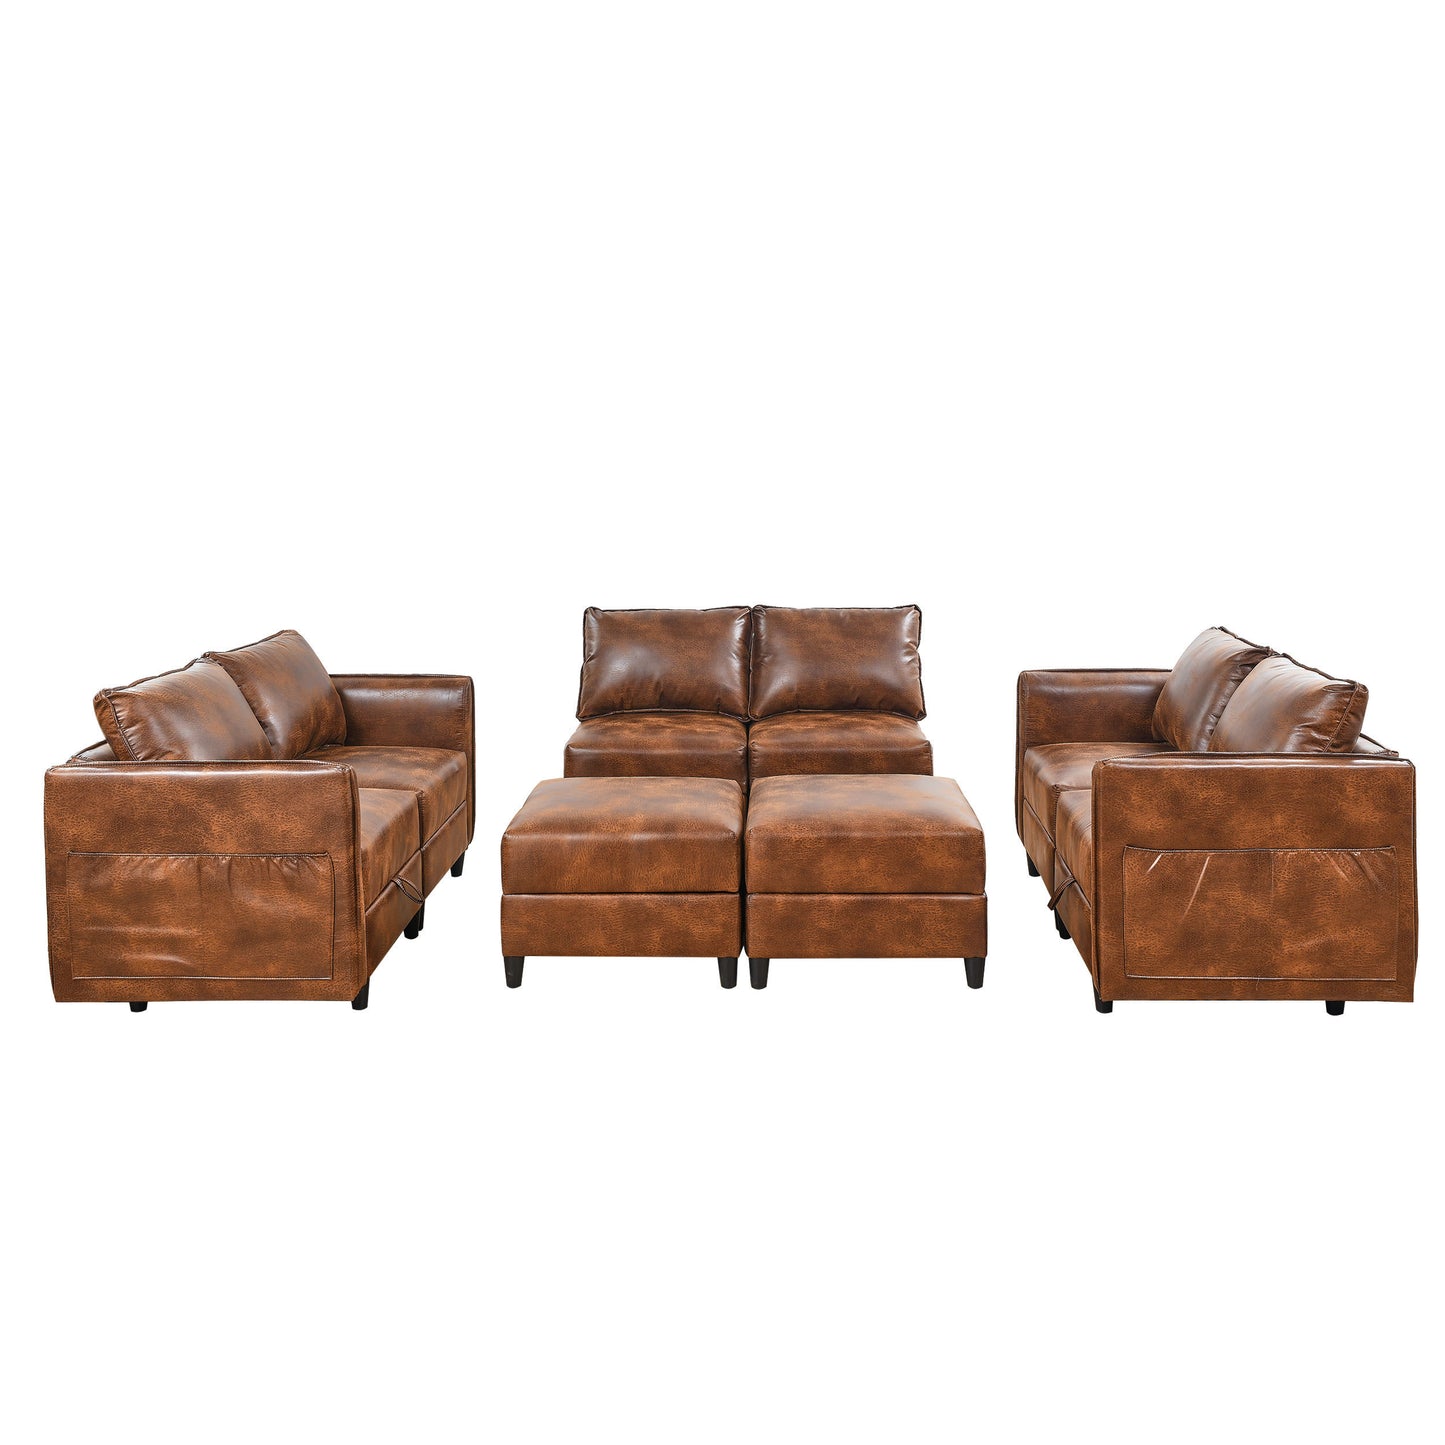 3-Piece Combination Convertible Brown Sleeper Sofa Set with Storage